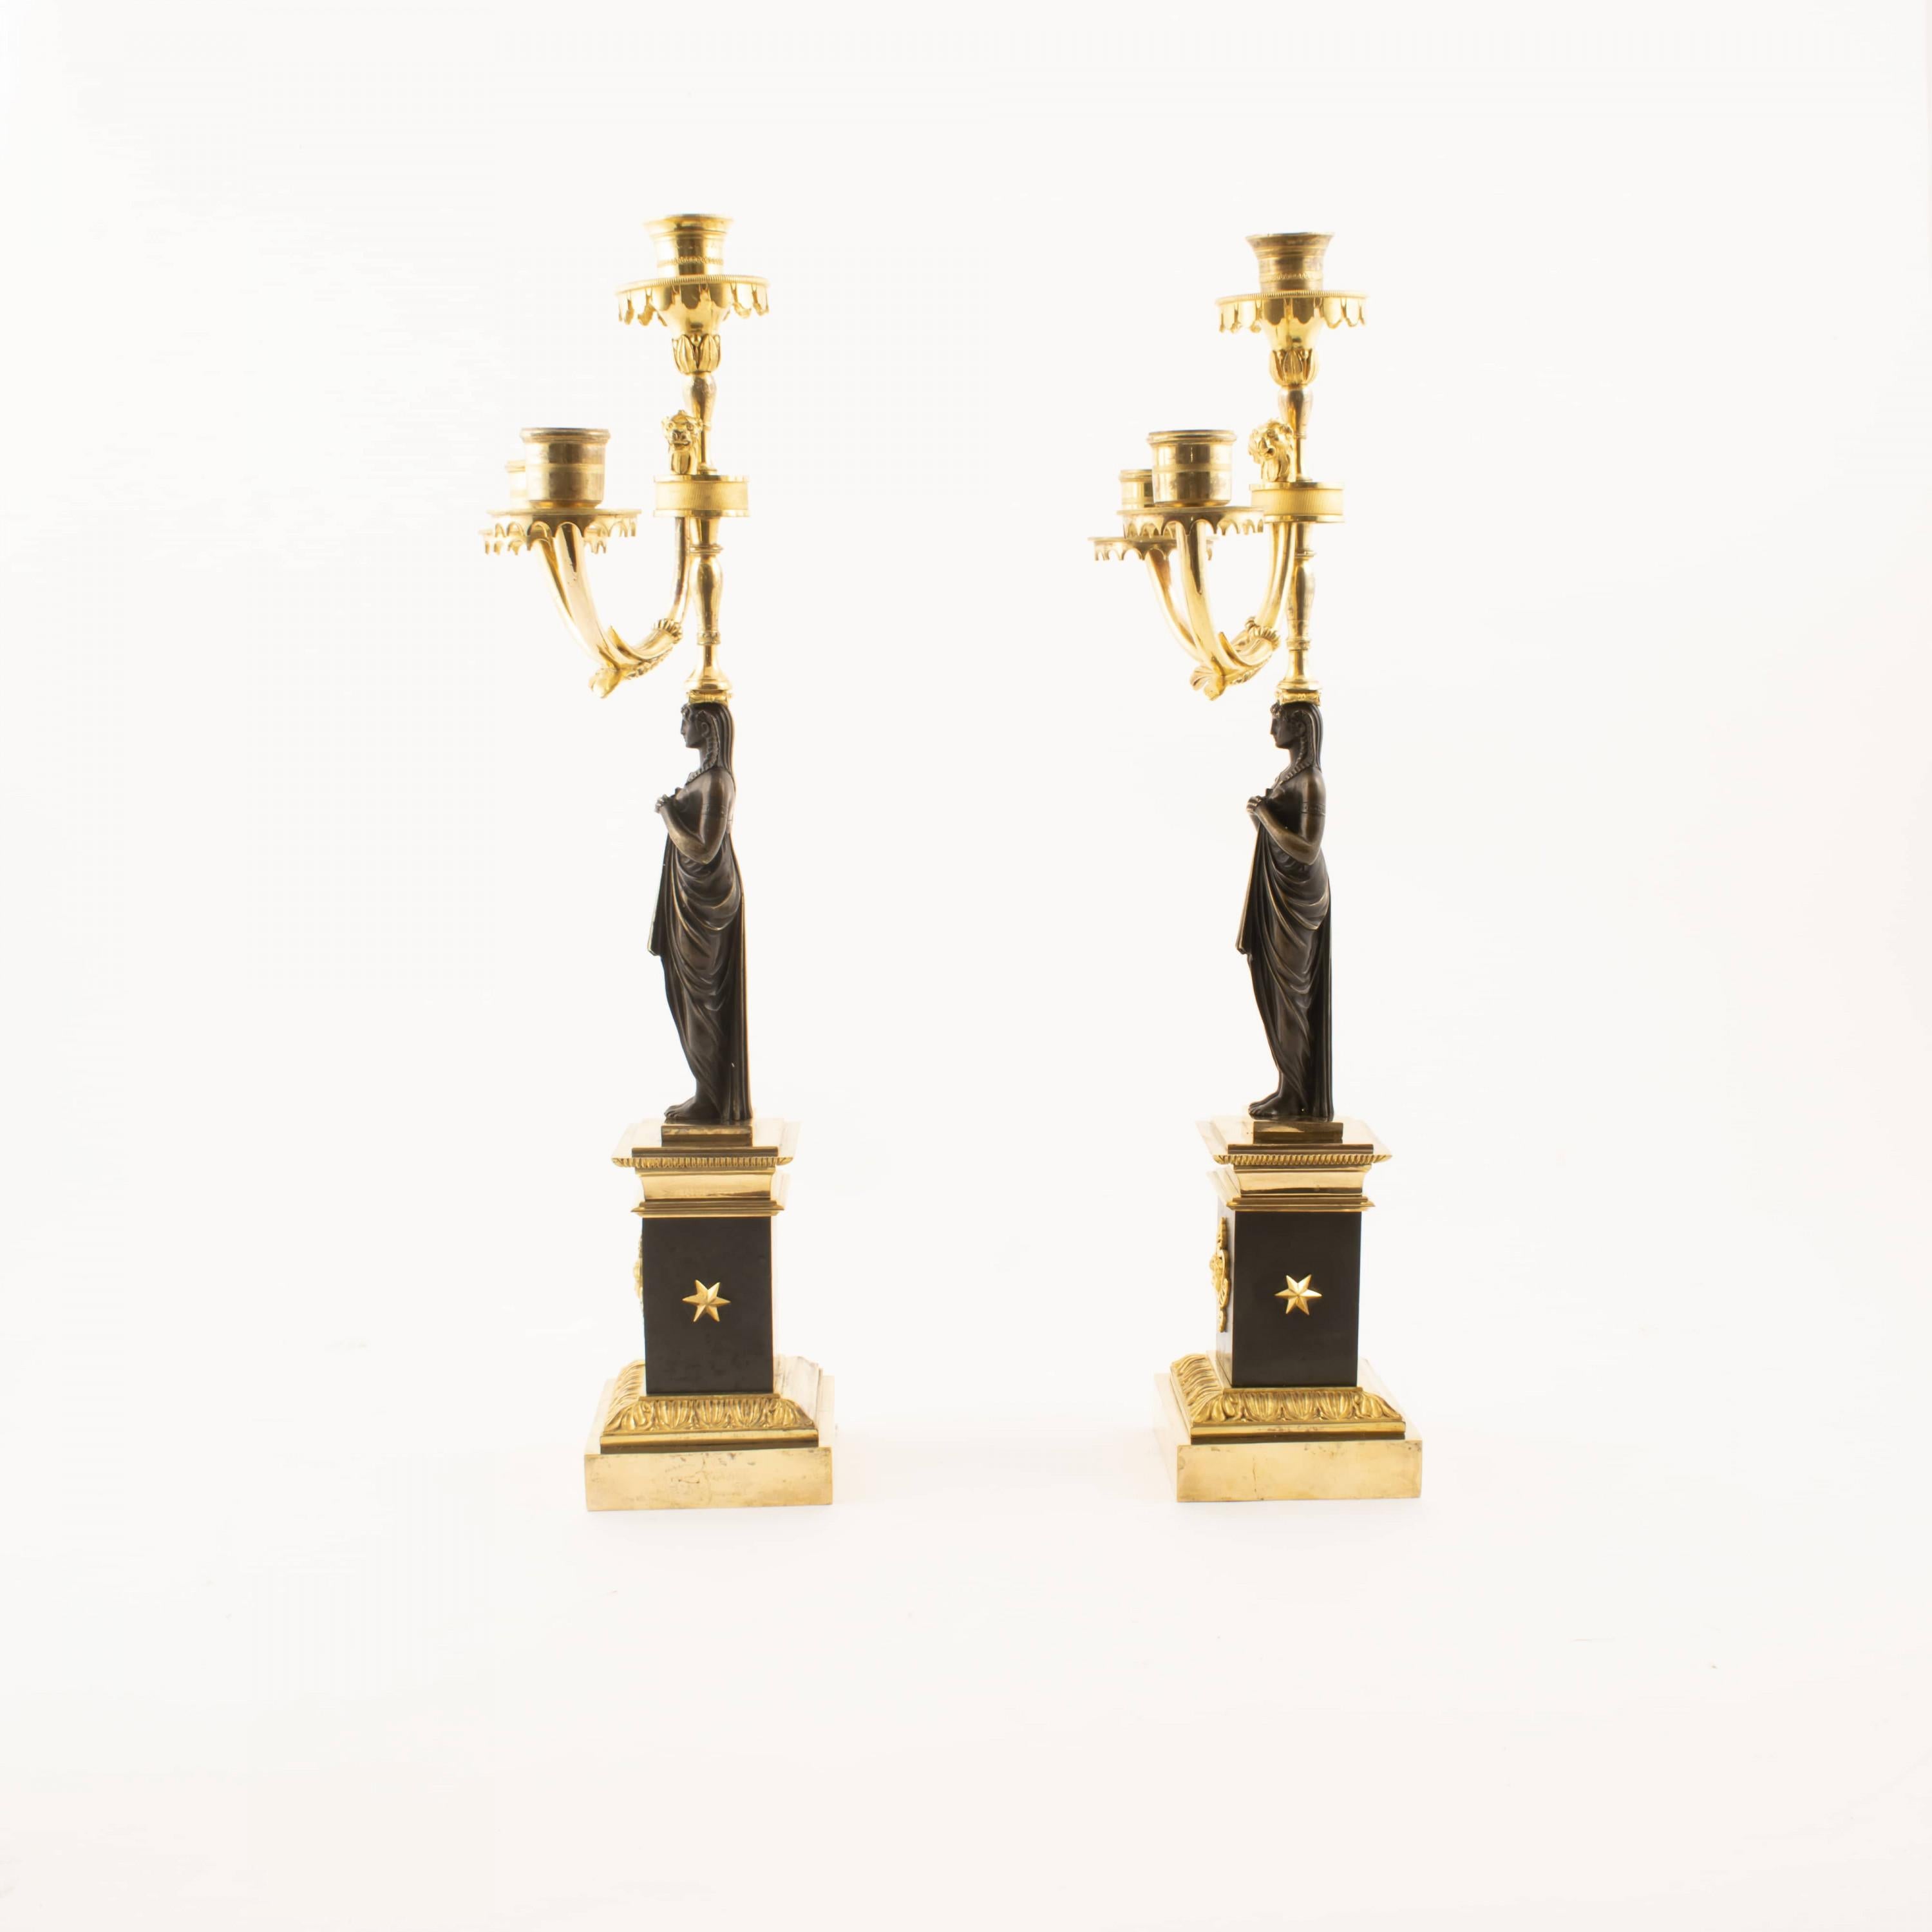 Pair of French Empire Candelabras. Women. Gilded And Patinated Bronze In Good Condition For Sale In Kastrup, DK